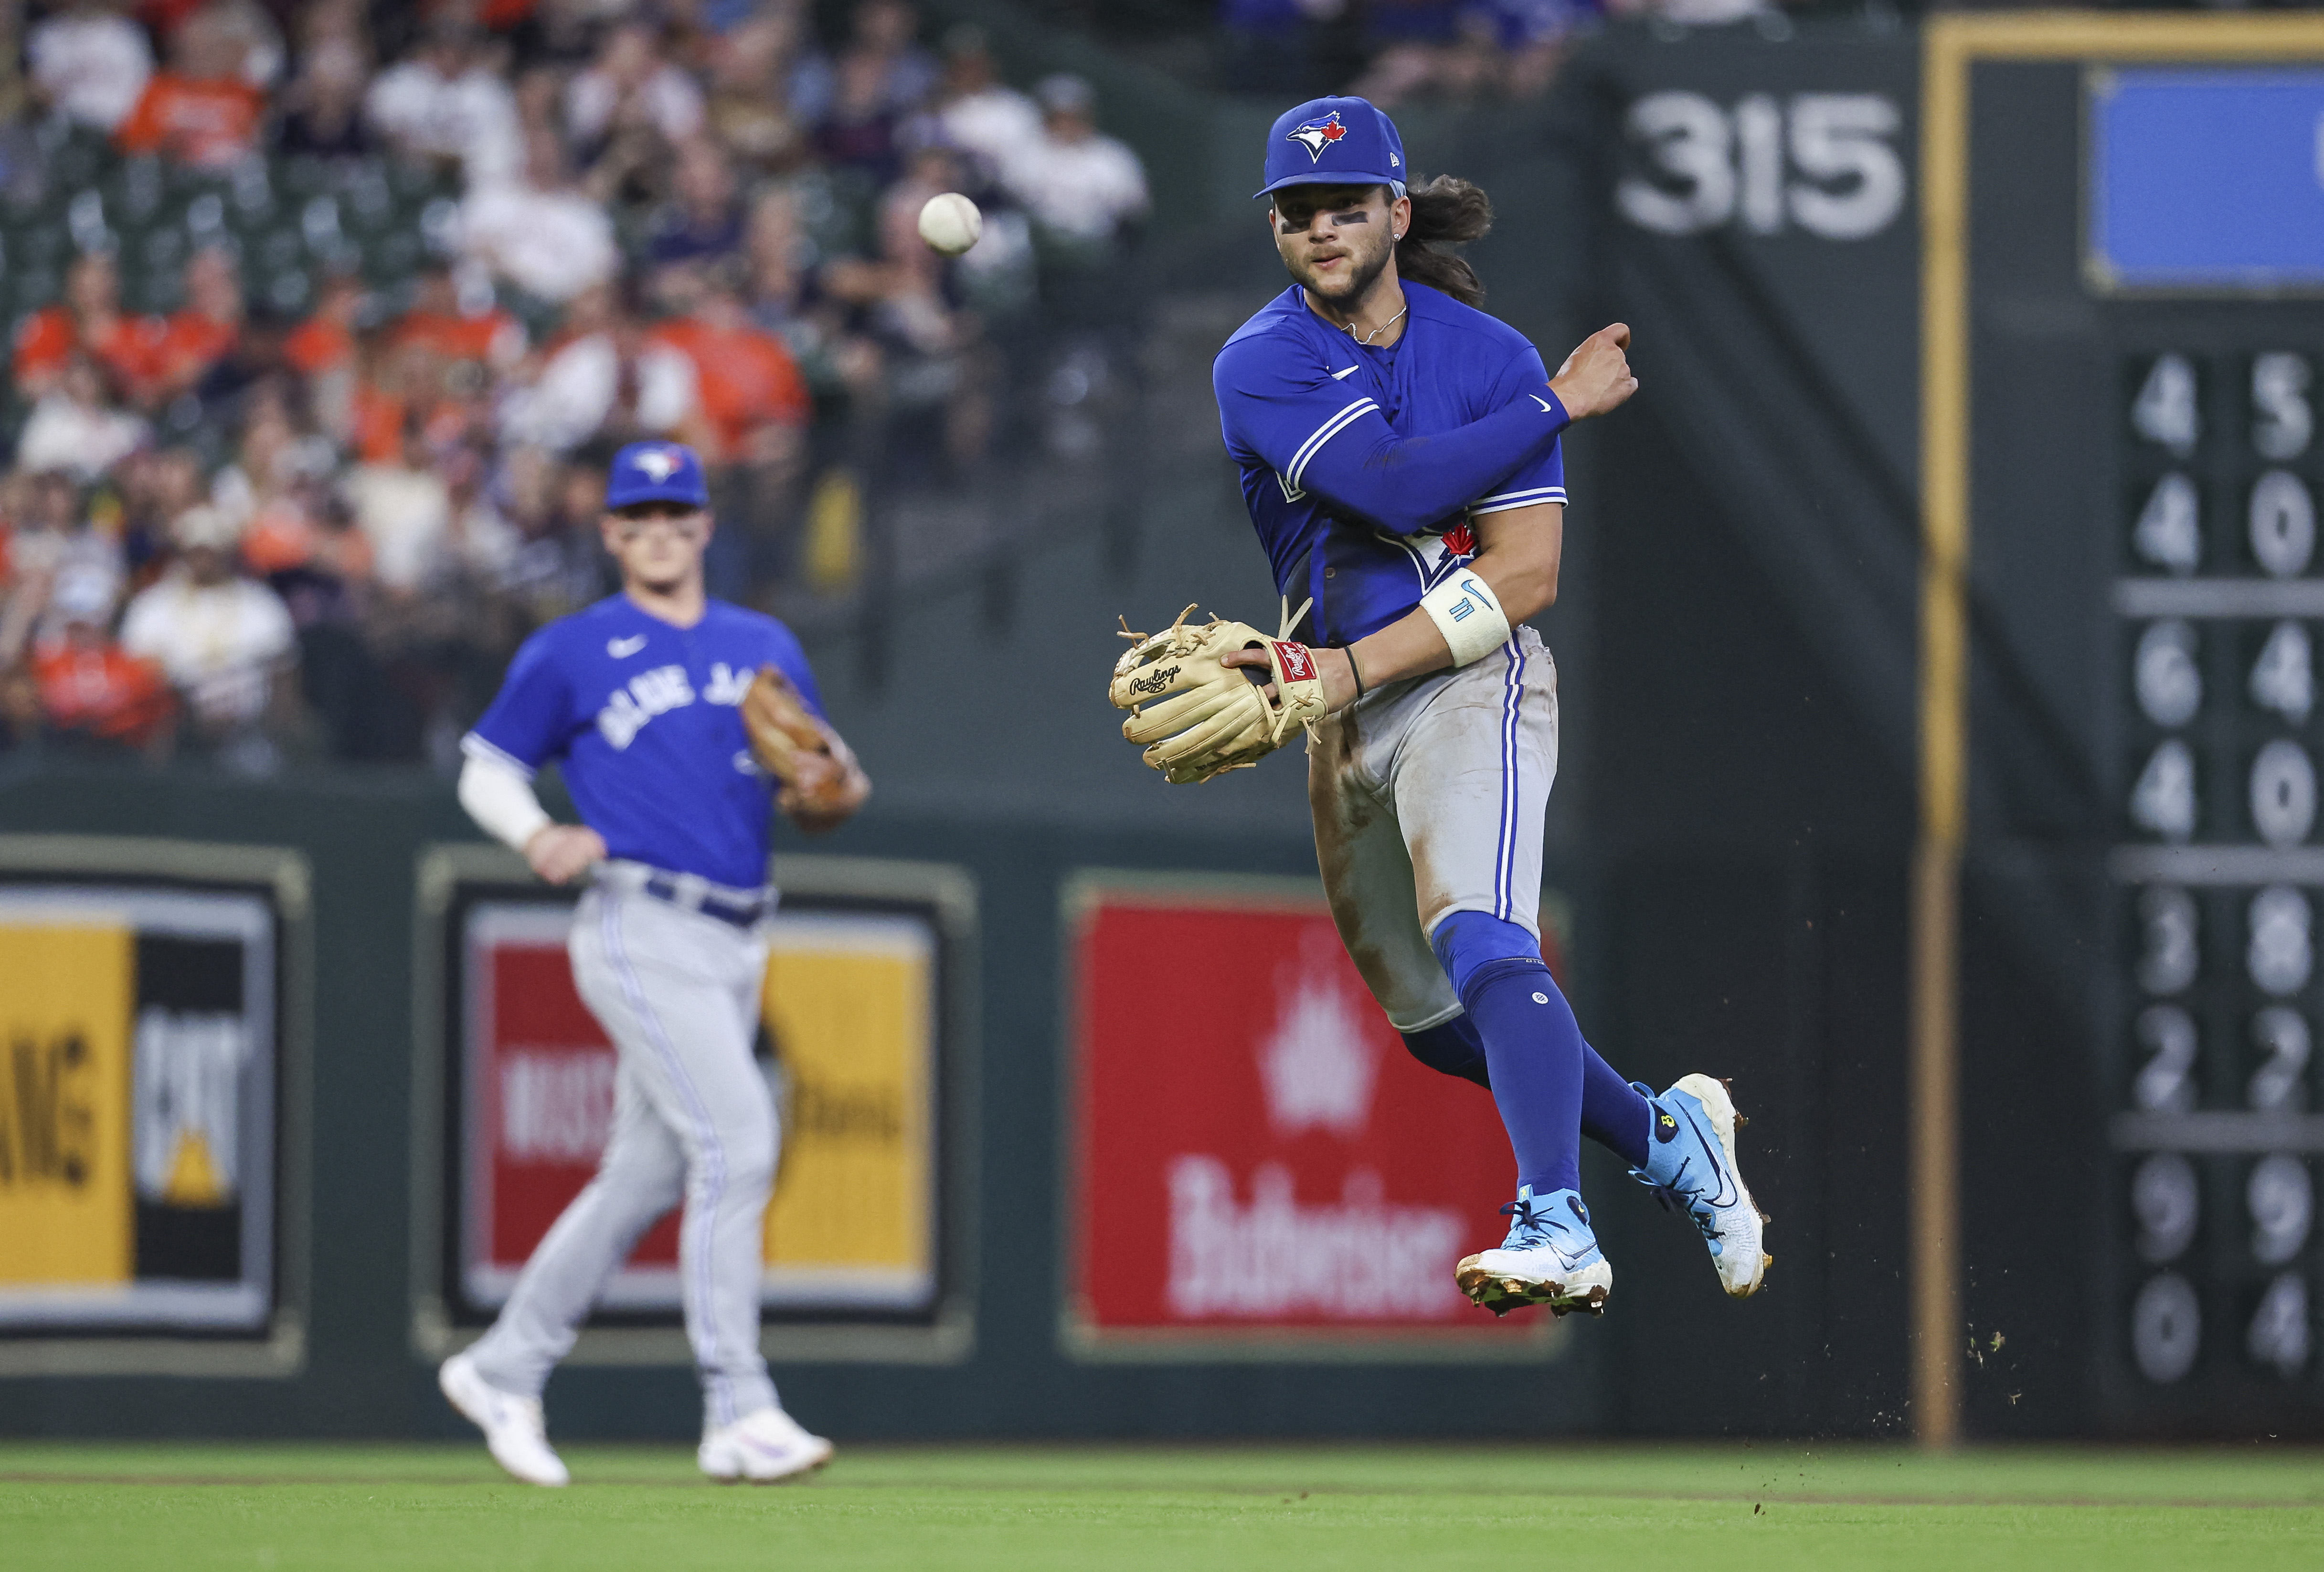 Merrifield's baserunning helps Blue Jays beat Twins in extra innings